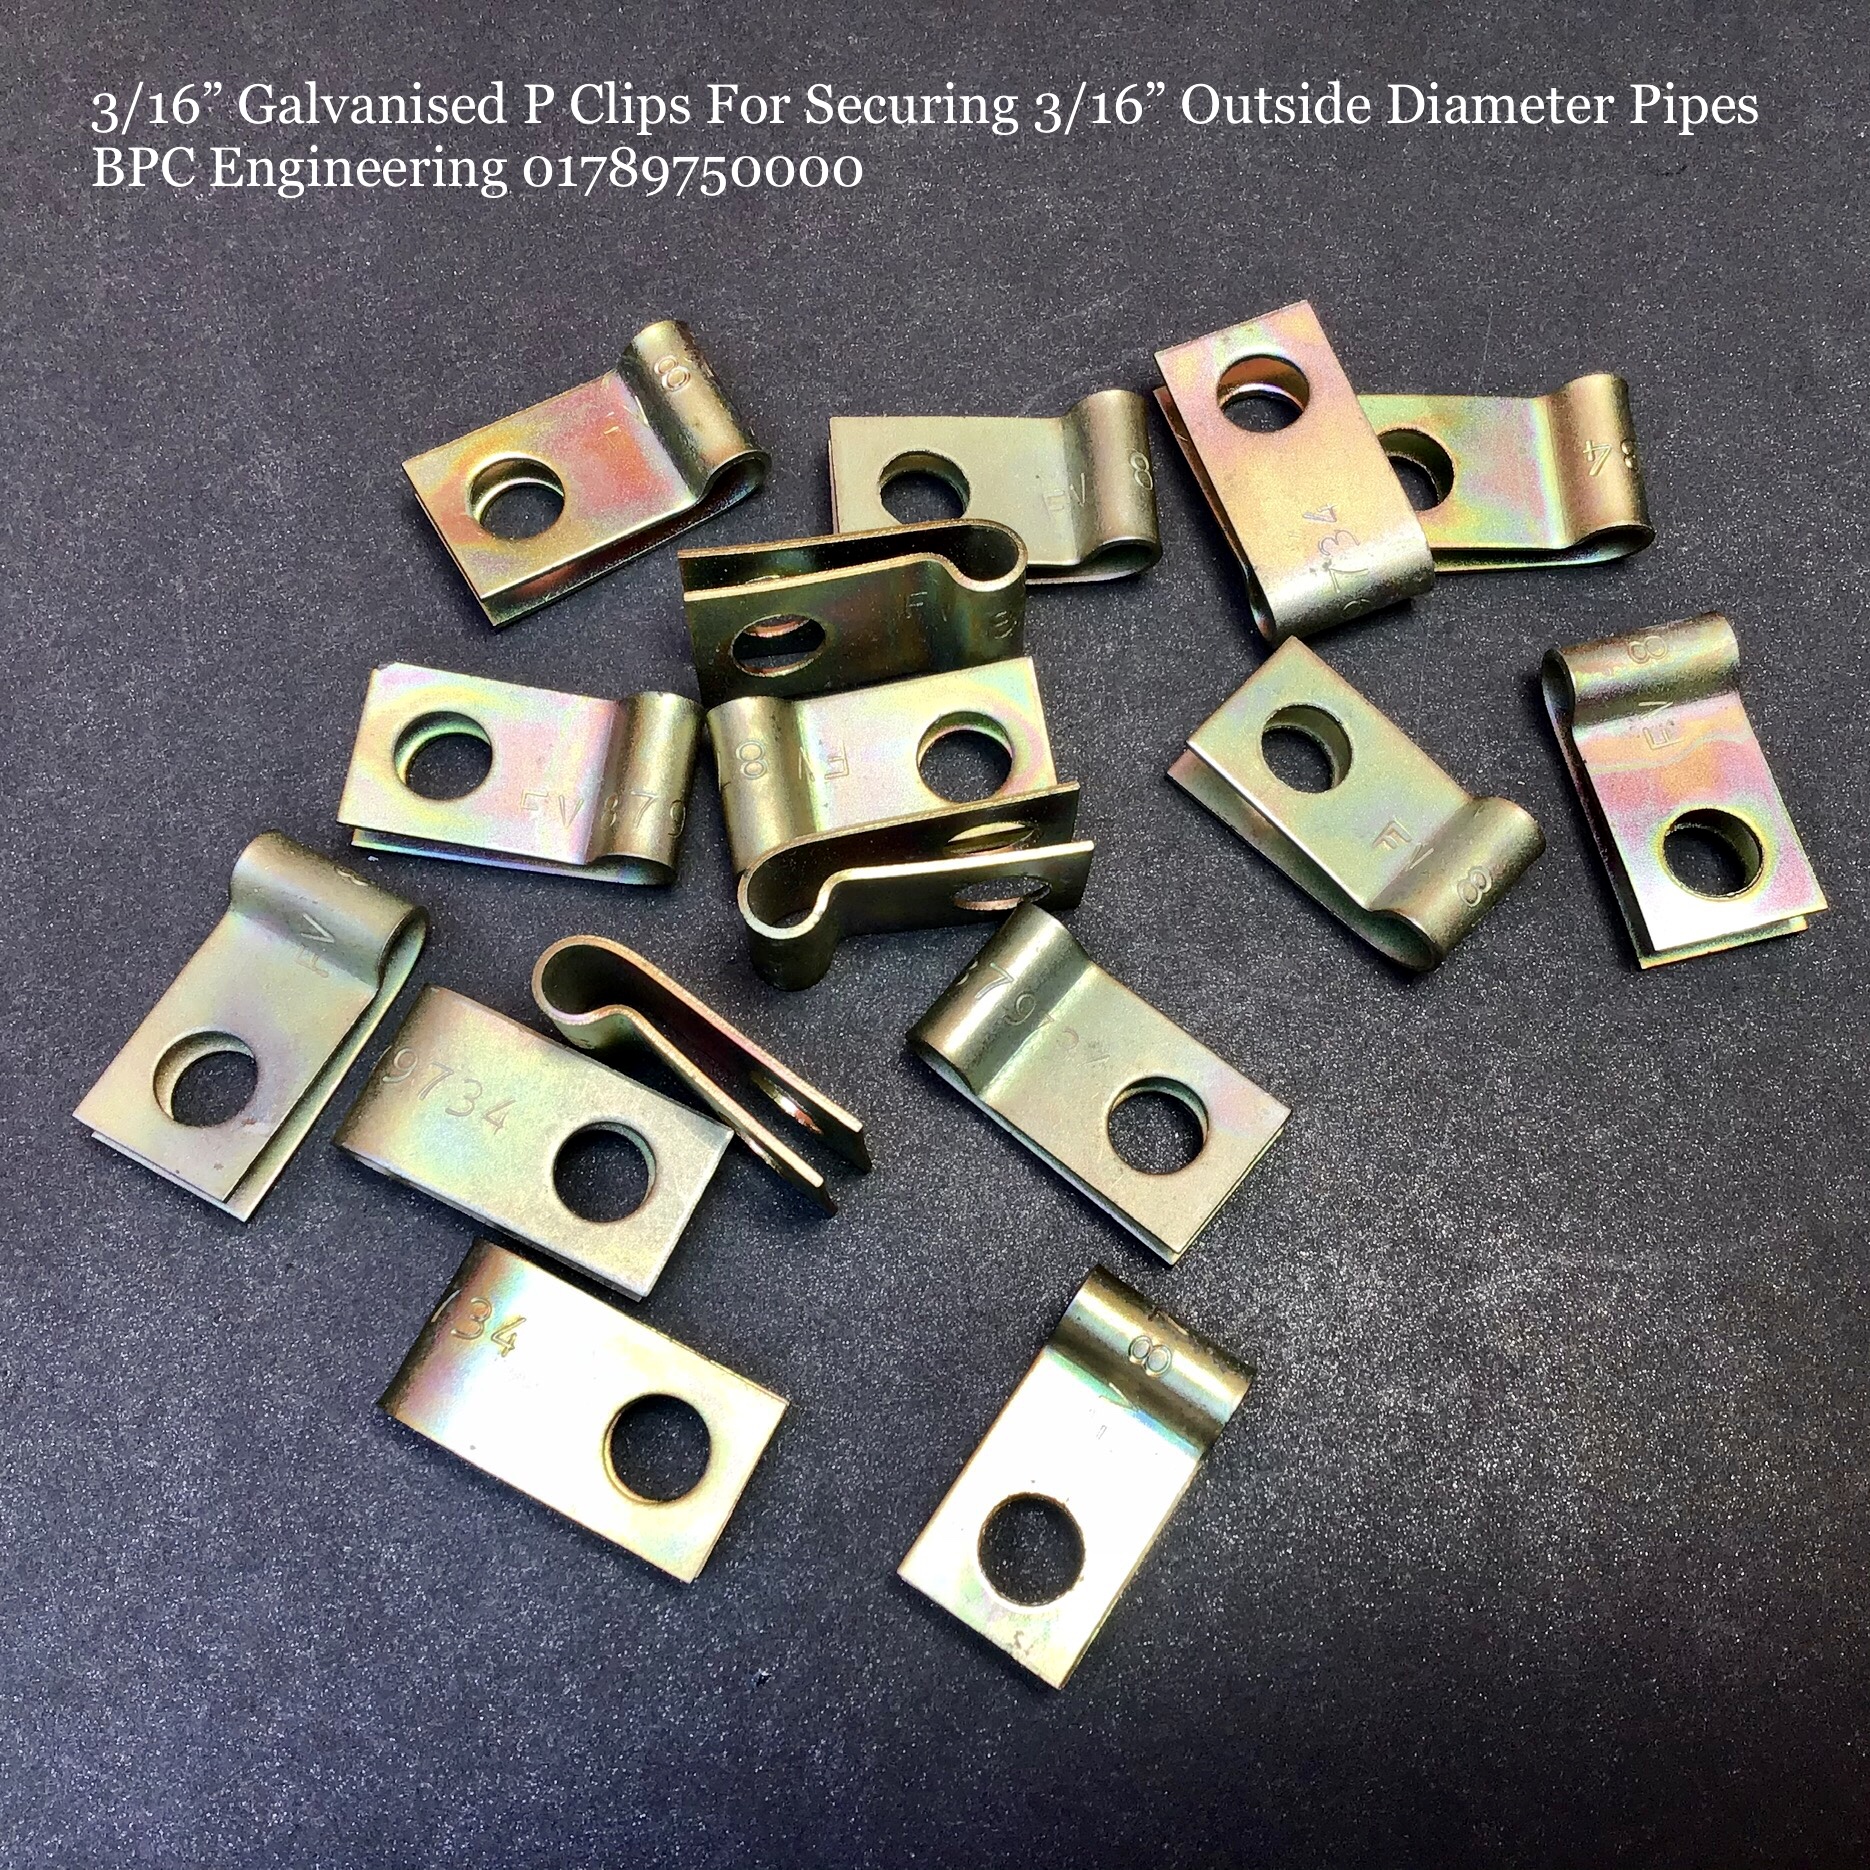 316 P Clips Galvanised Fasteners With 516 Fixing Hole